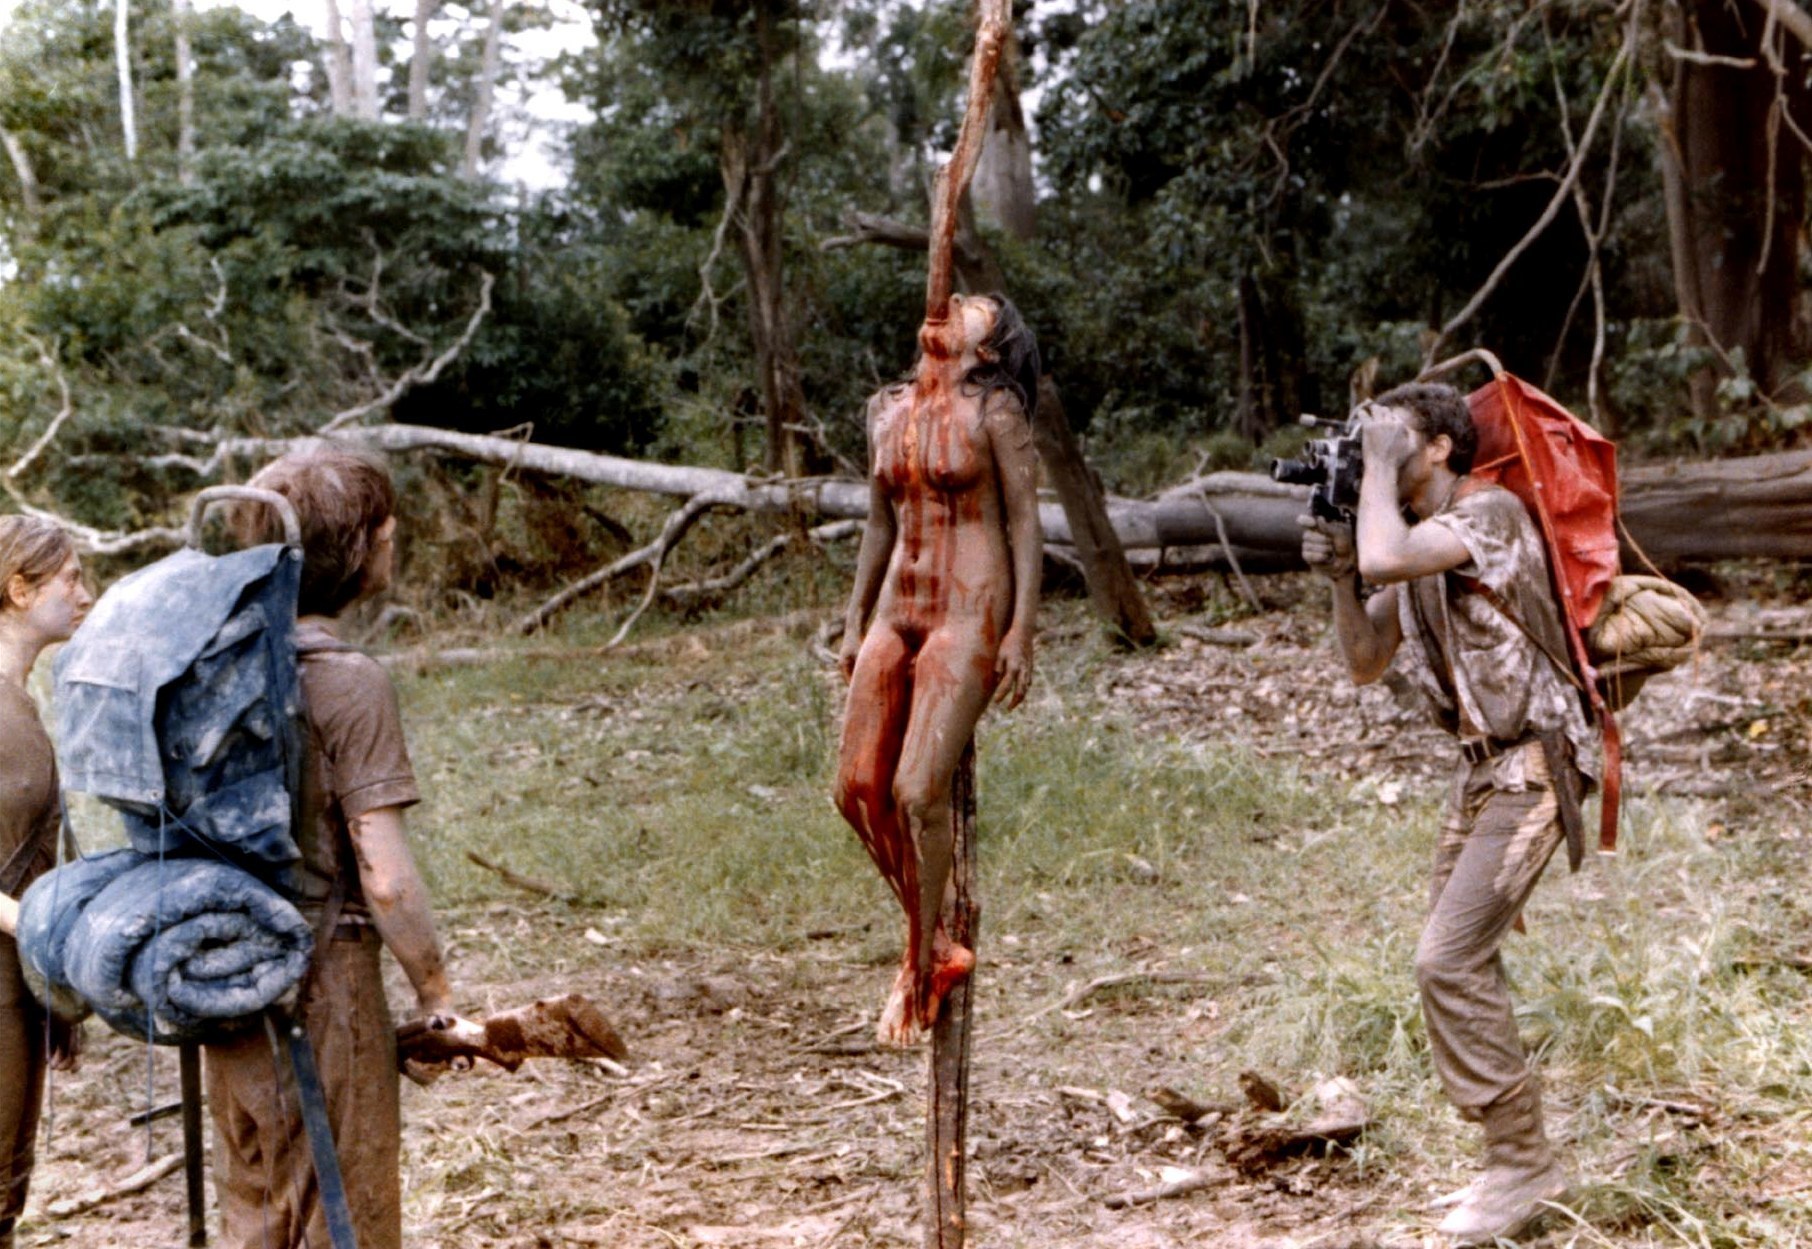 The party encounter mutilated bodies in Cannibal Holocaust (1979)